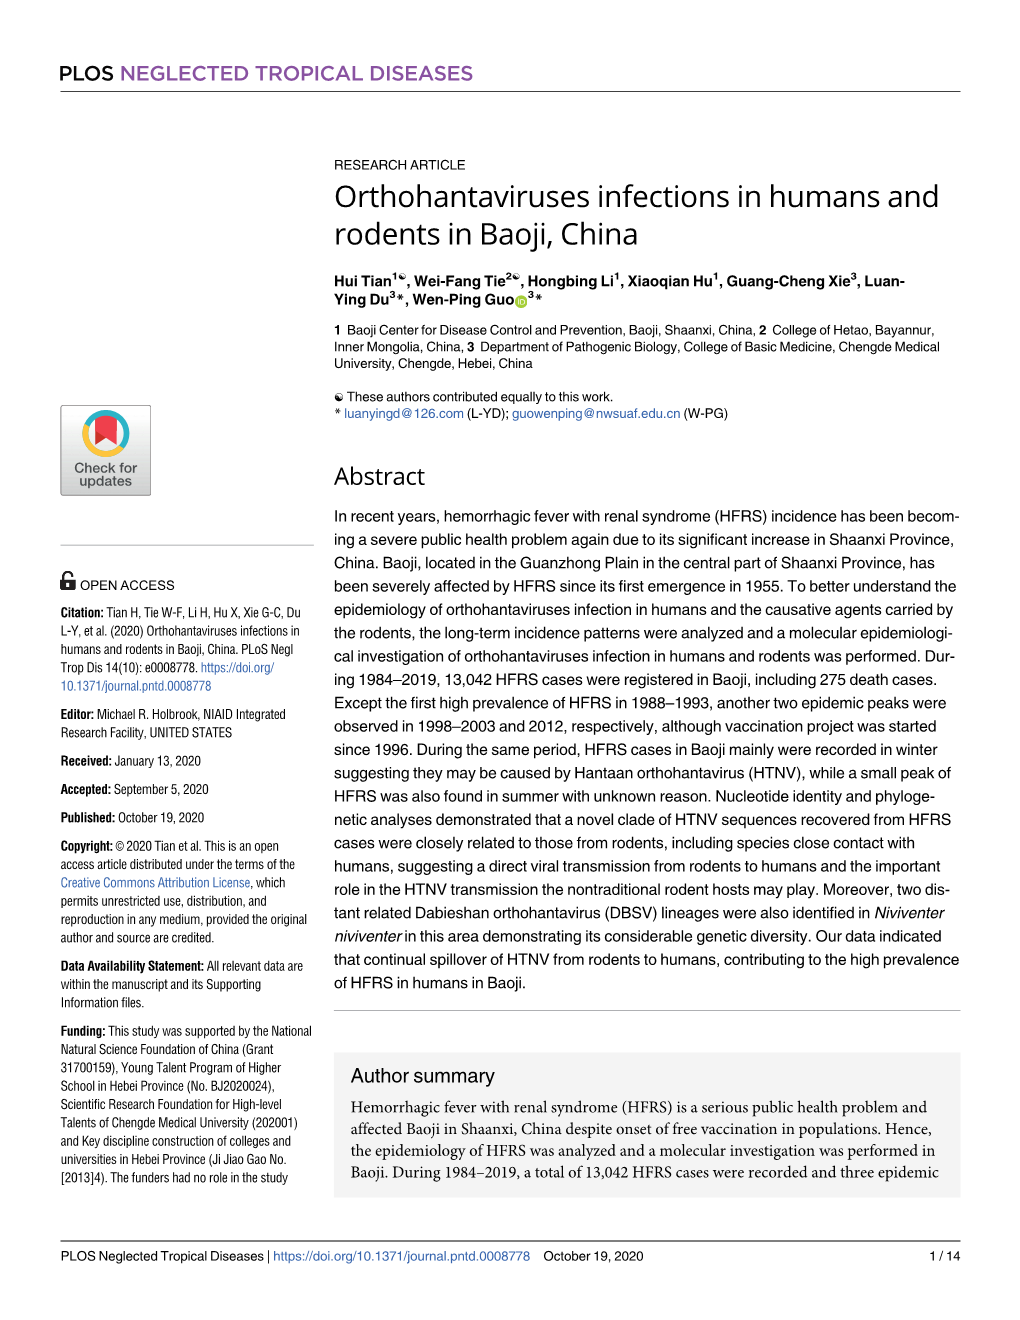 Orthohantaviruses Infections in Humans and Rodents in Baoji, China